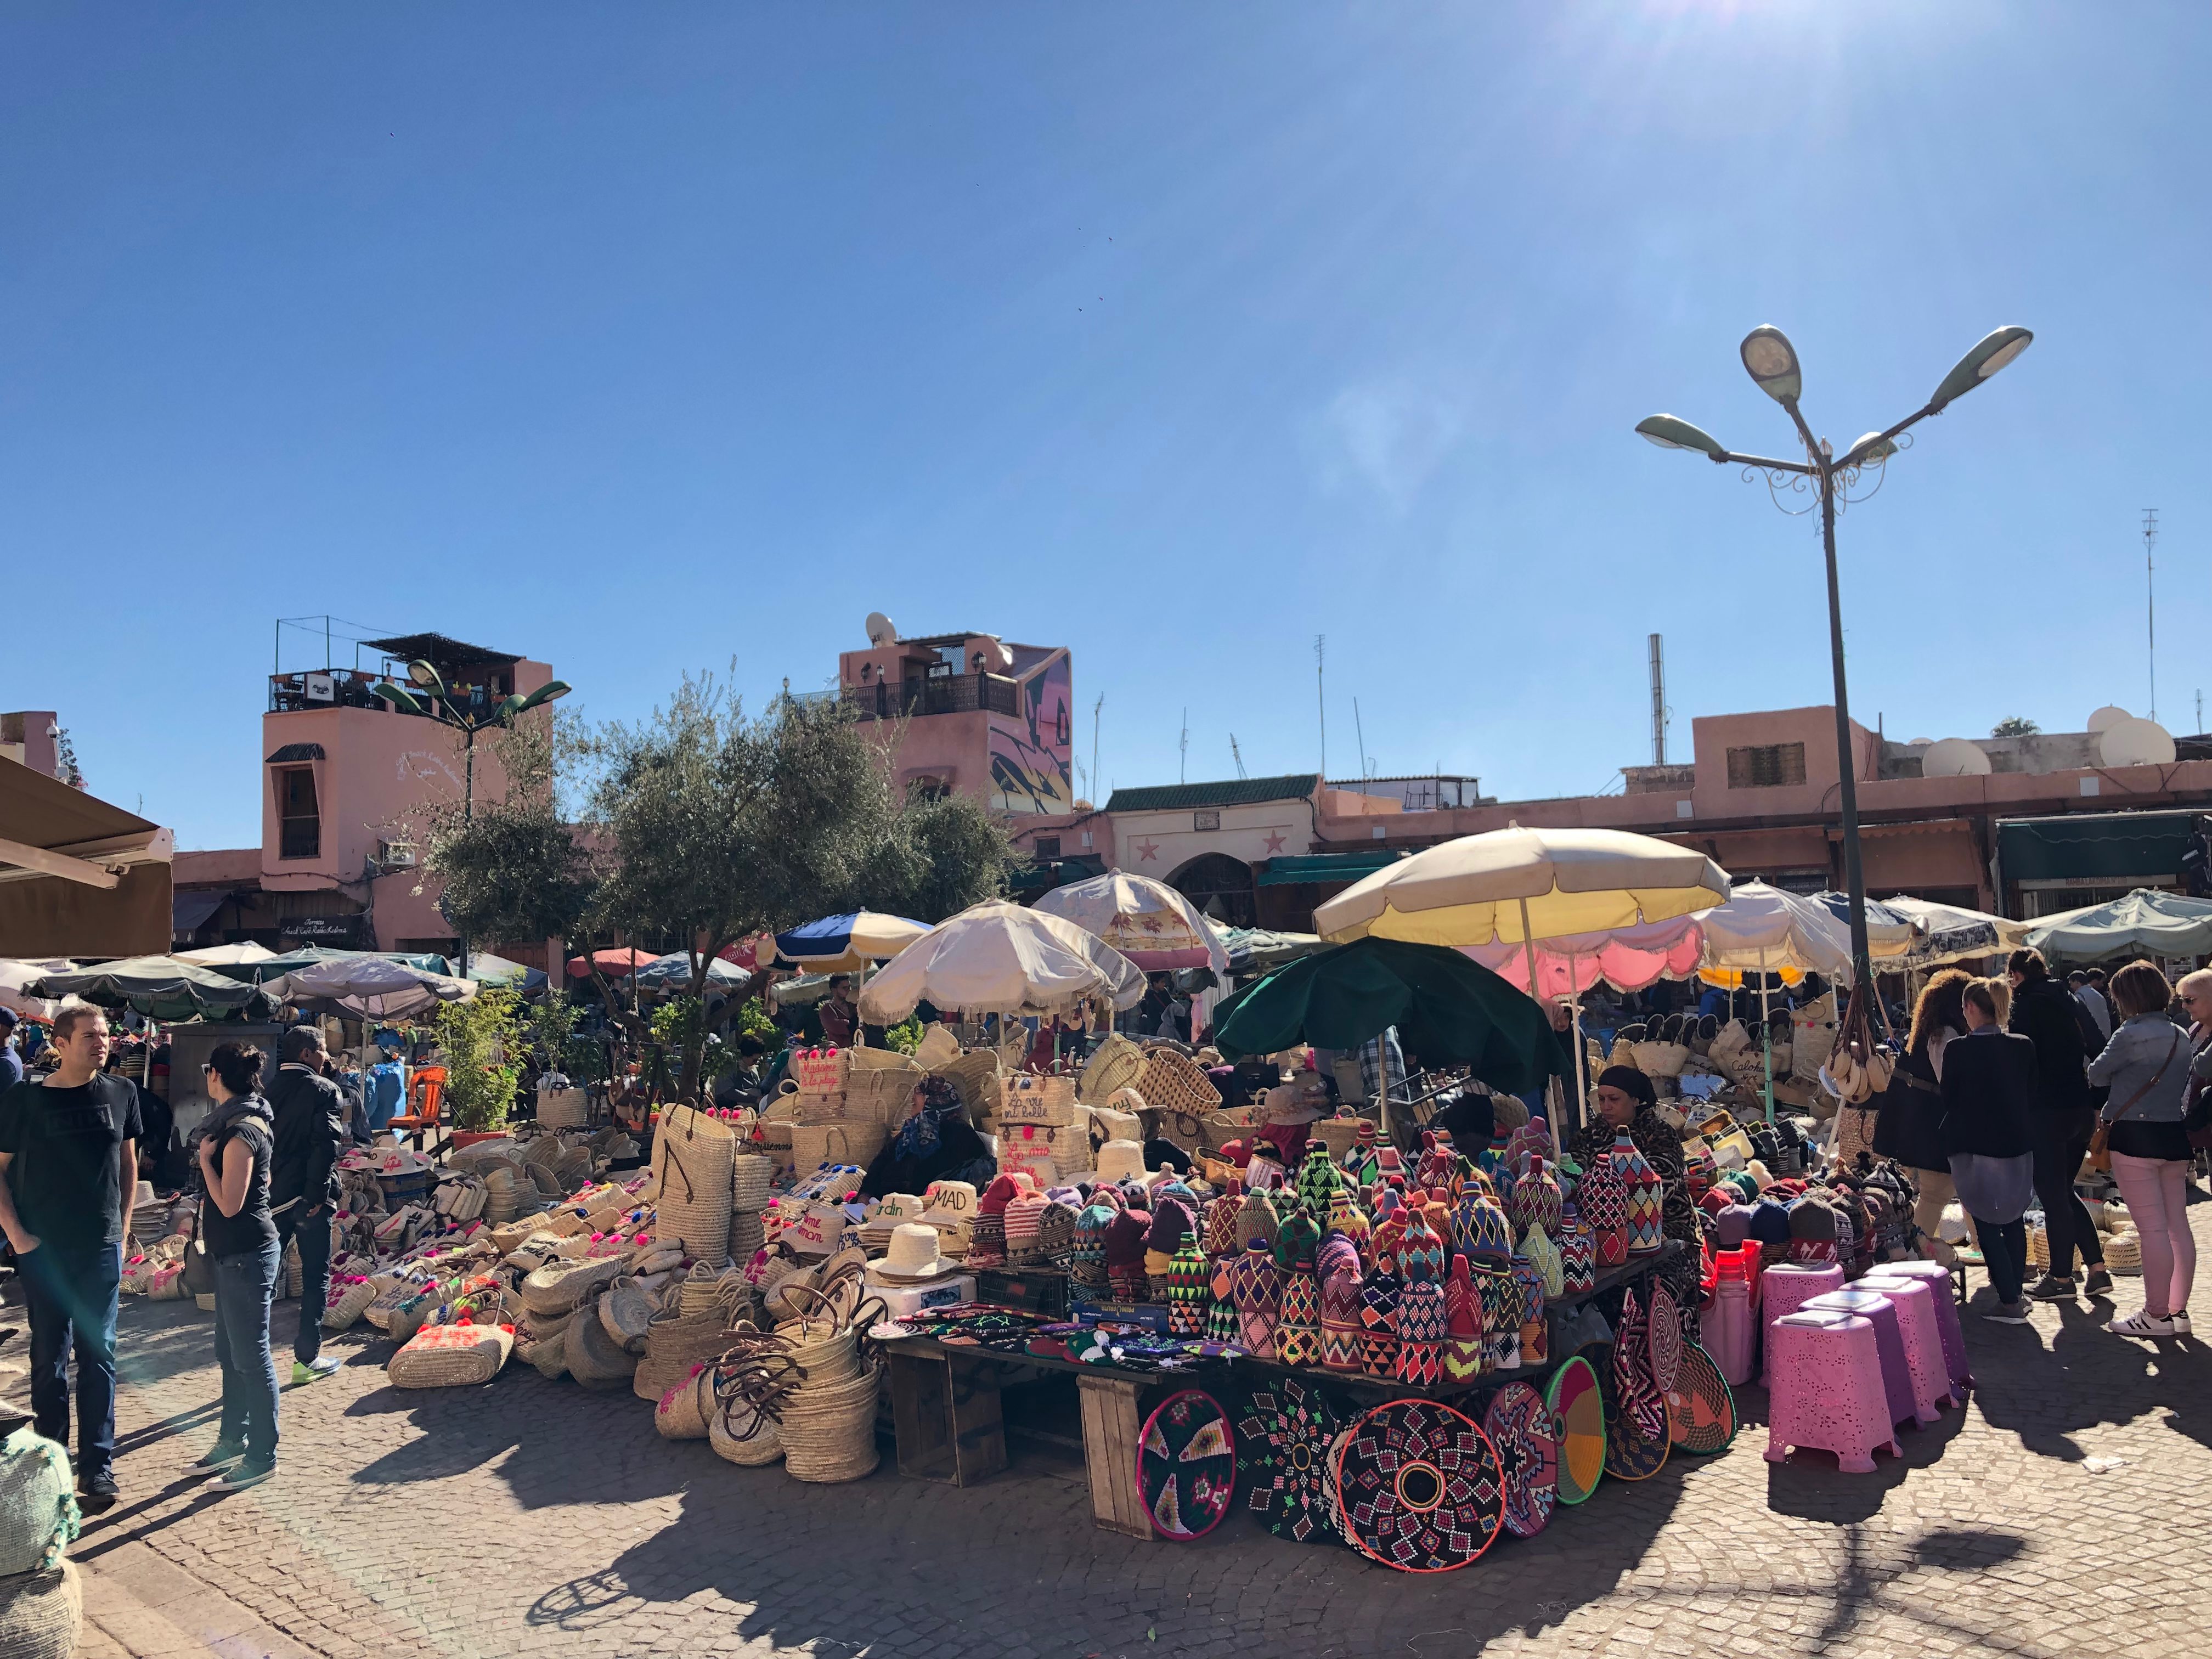 In the souk of Marrakech